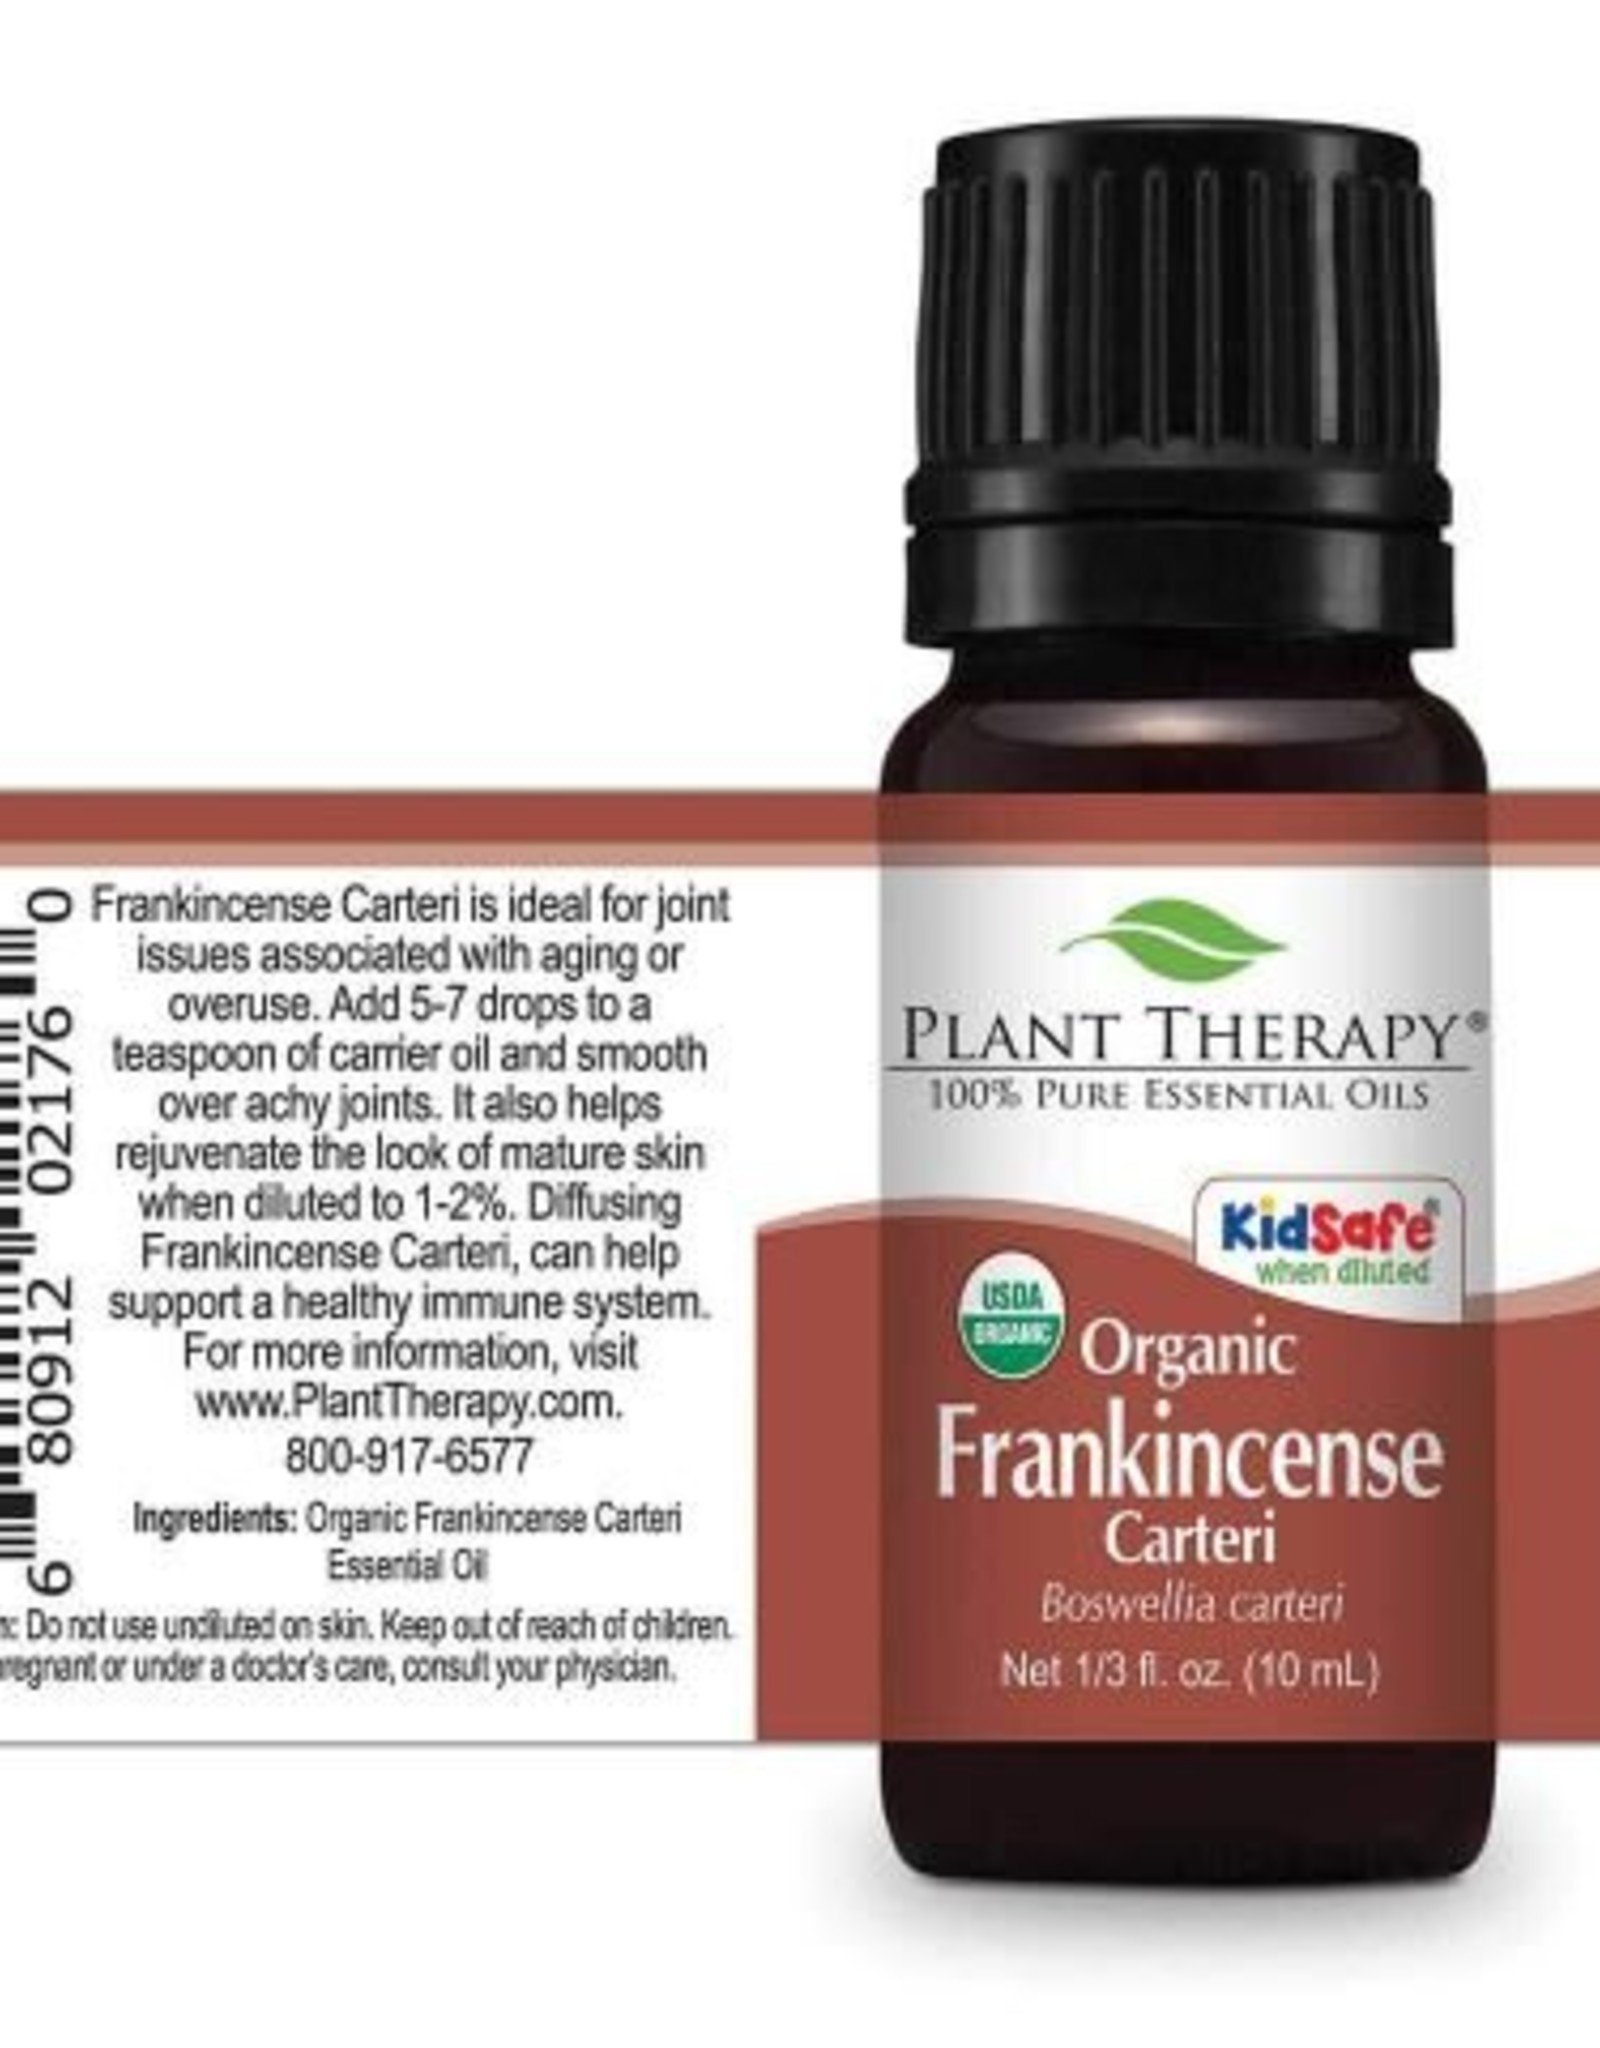 Plant Therapy Plant Therapy Essential Oils Frankincense Carteri 10ml